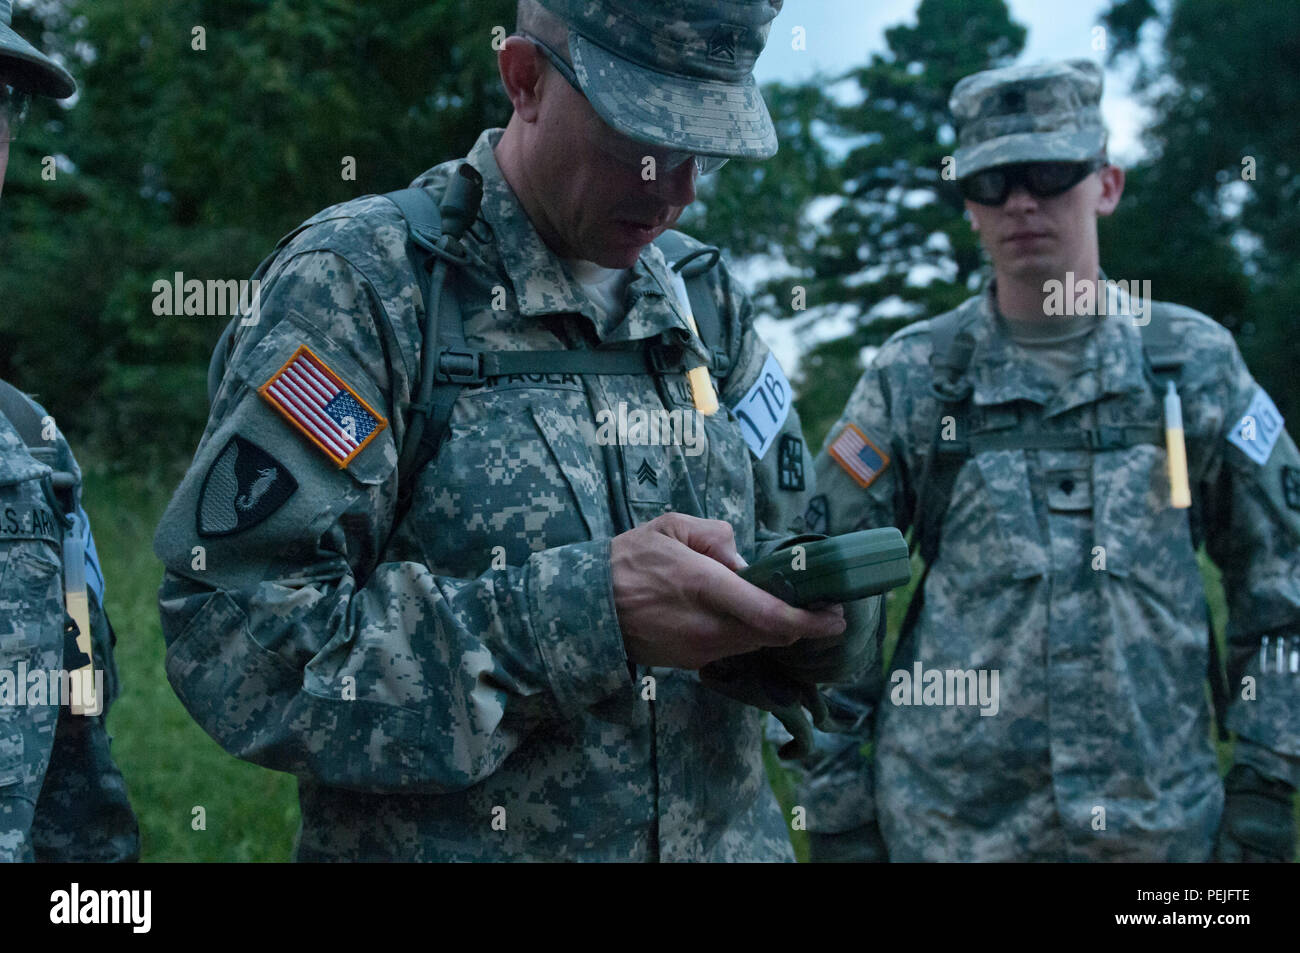 U.S. Army Reserve Sgt. Michael Dipaola, combat engineer, 680th Engineer Company out of Webster, N.Y., inputs coordinates in a Defense Advanced GPS Receiver before his team moves to find their points during the land navigation portion of Sapper Stakes 2015 at Fort Chaffee, Ark., Aug. 30. (U.S. Army photo by Staff Sgt. Debralee Best) Stock Photo